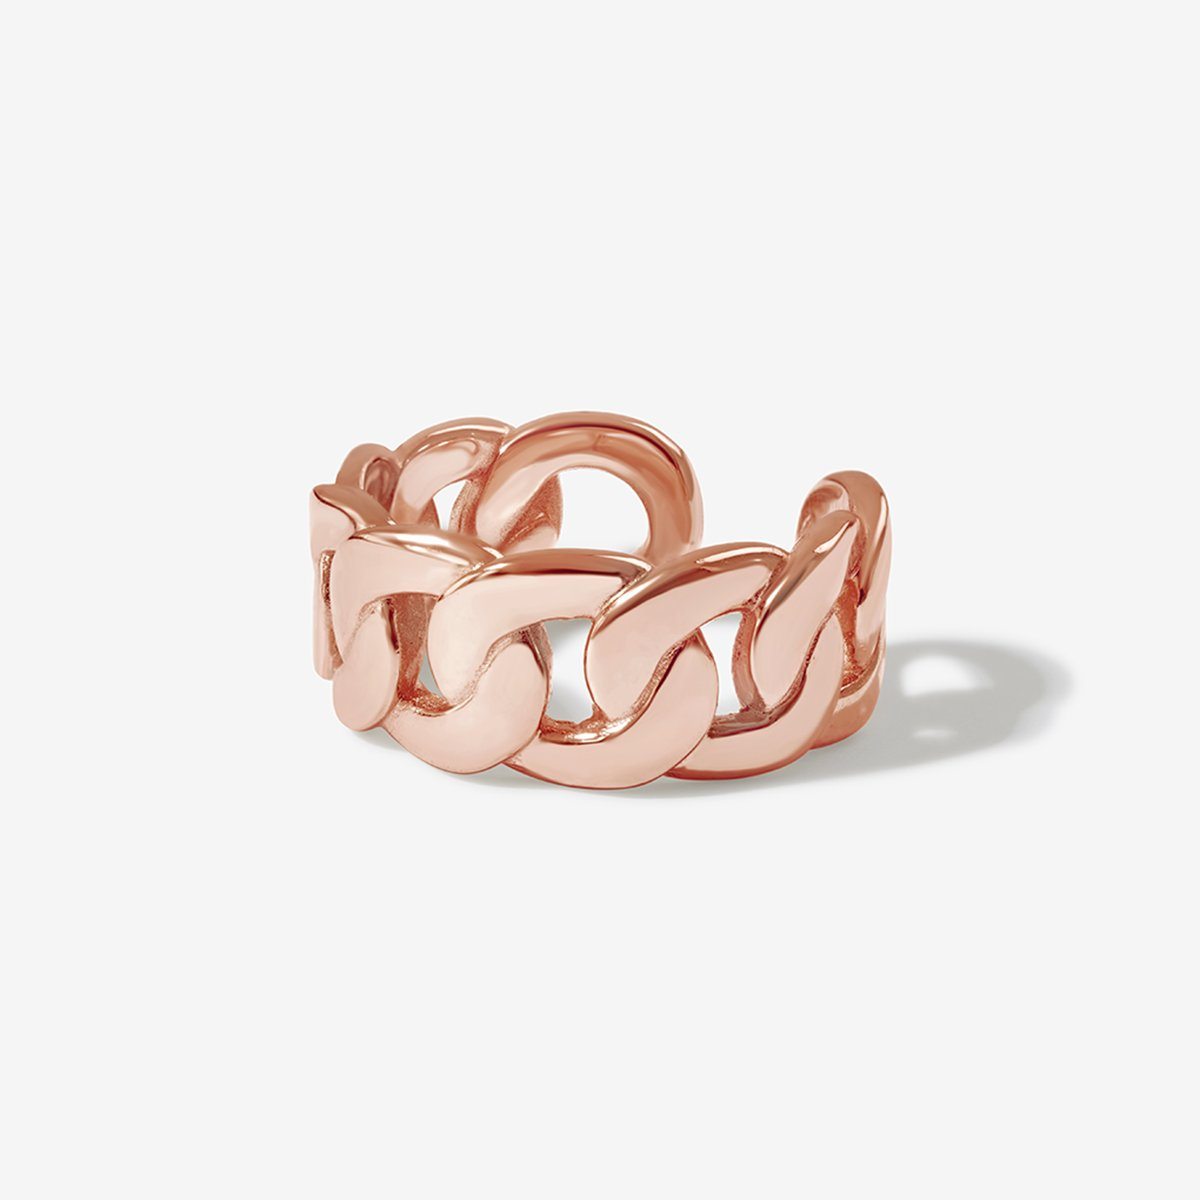 Bowery Curb Chain Ring in 14K Rose Gold 2.4 mm / 5 / Loose